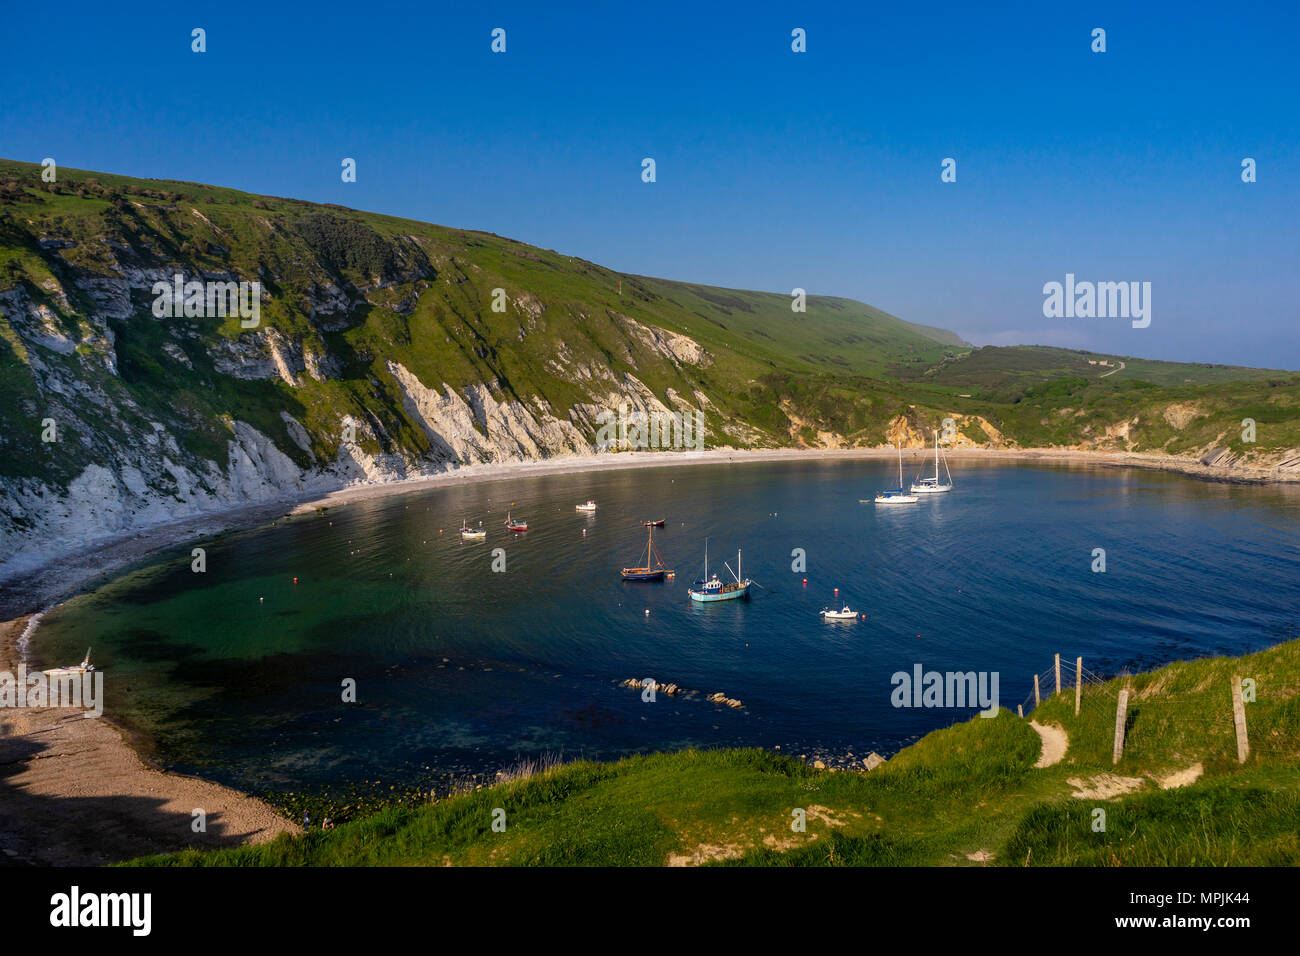 Scenic view over Lulworth Cove, part of the Jurassic Coast UNESCO Natural World Heritage site in Dorset, England, UK Stock Photo